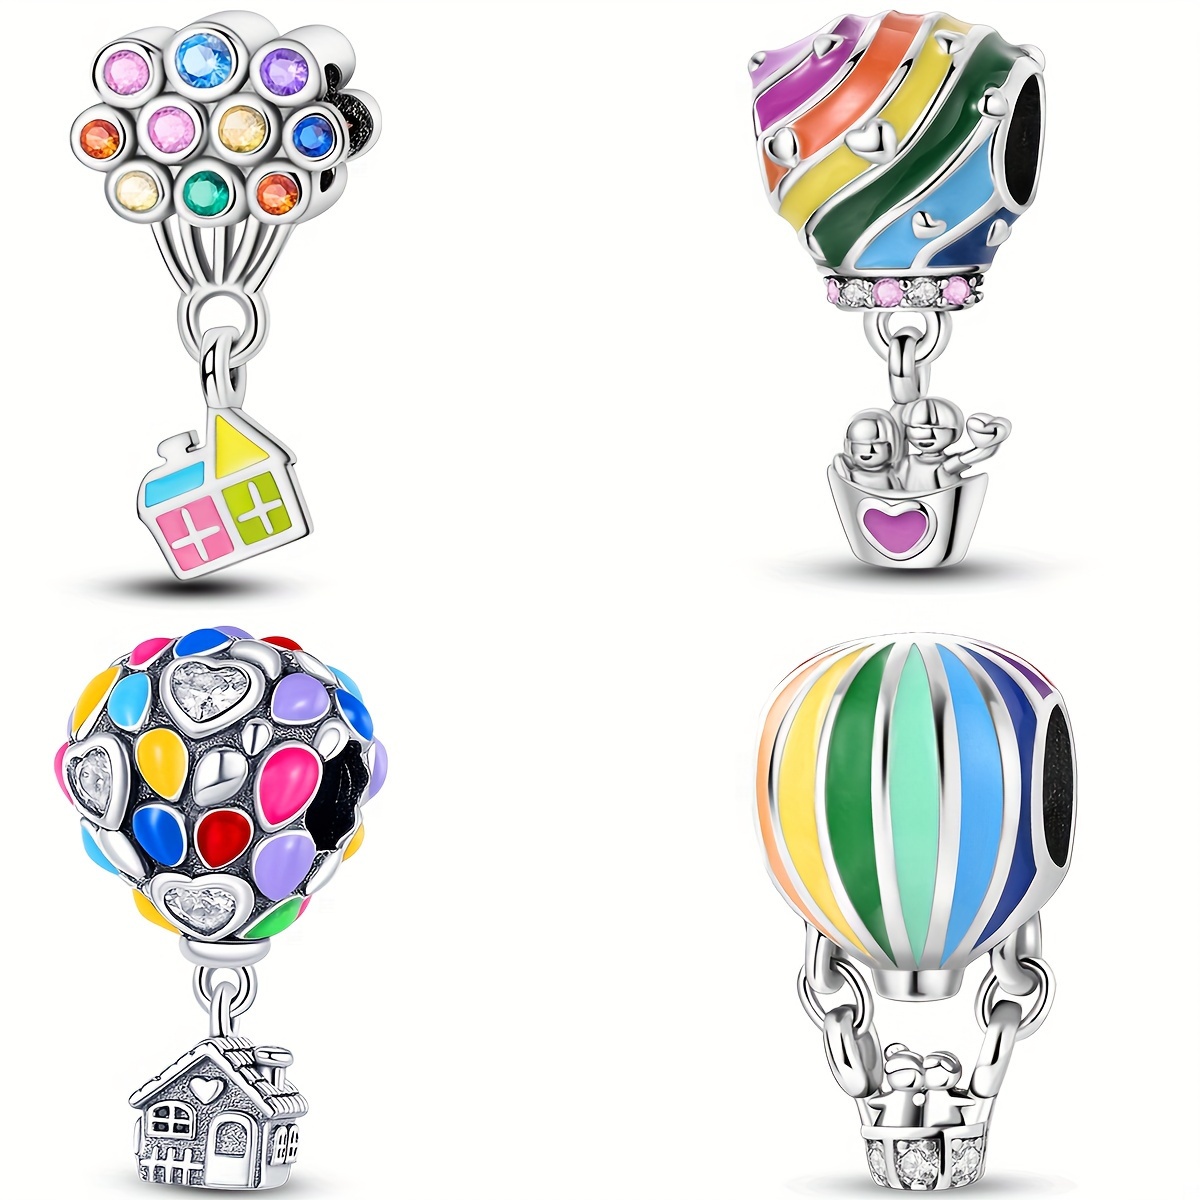 

925 Silver Plated Hot Air Balloon Series Colorful Enamel Romantic Love Hot Air Balloon Charm Beads Fit Original Bracelet Necklace Pendant Diy Jewelry Making Valentine's Day Gift